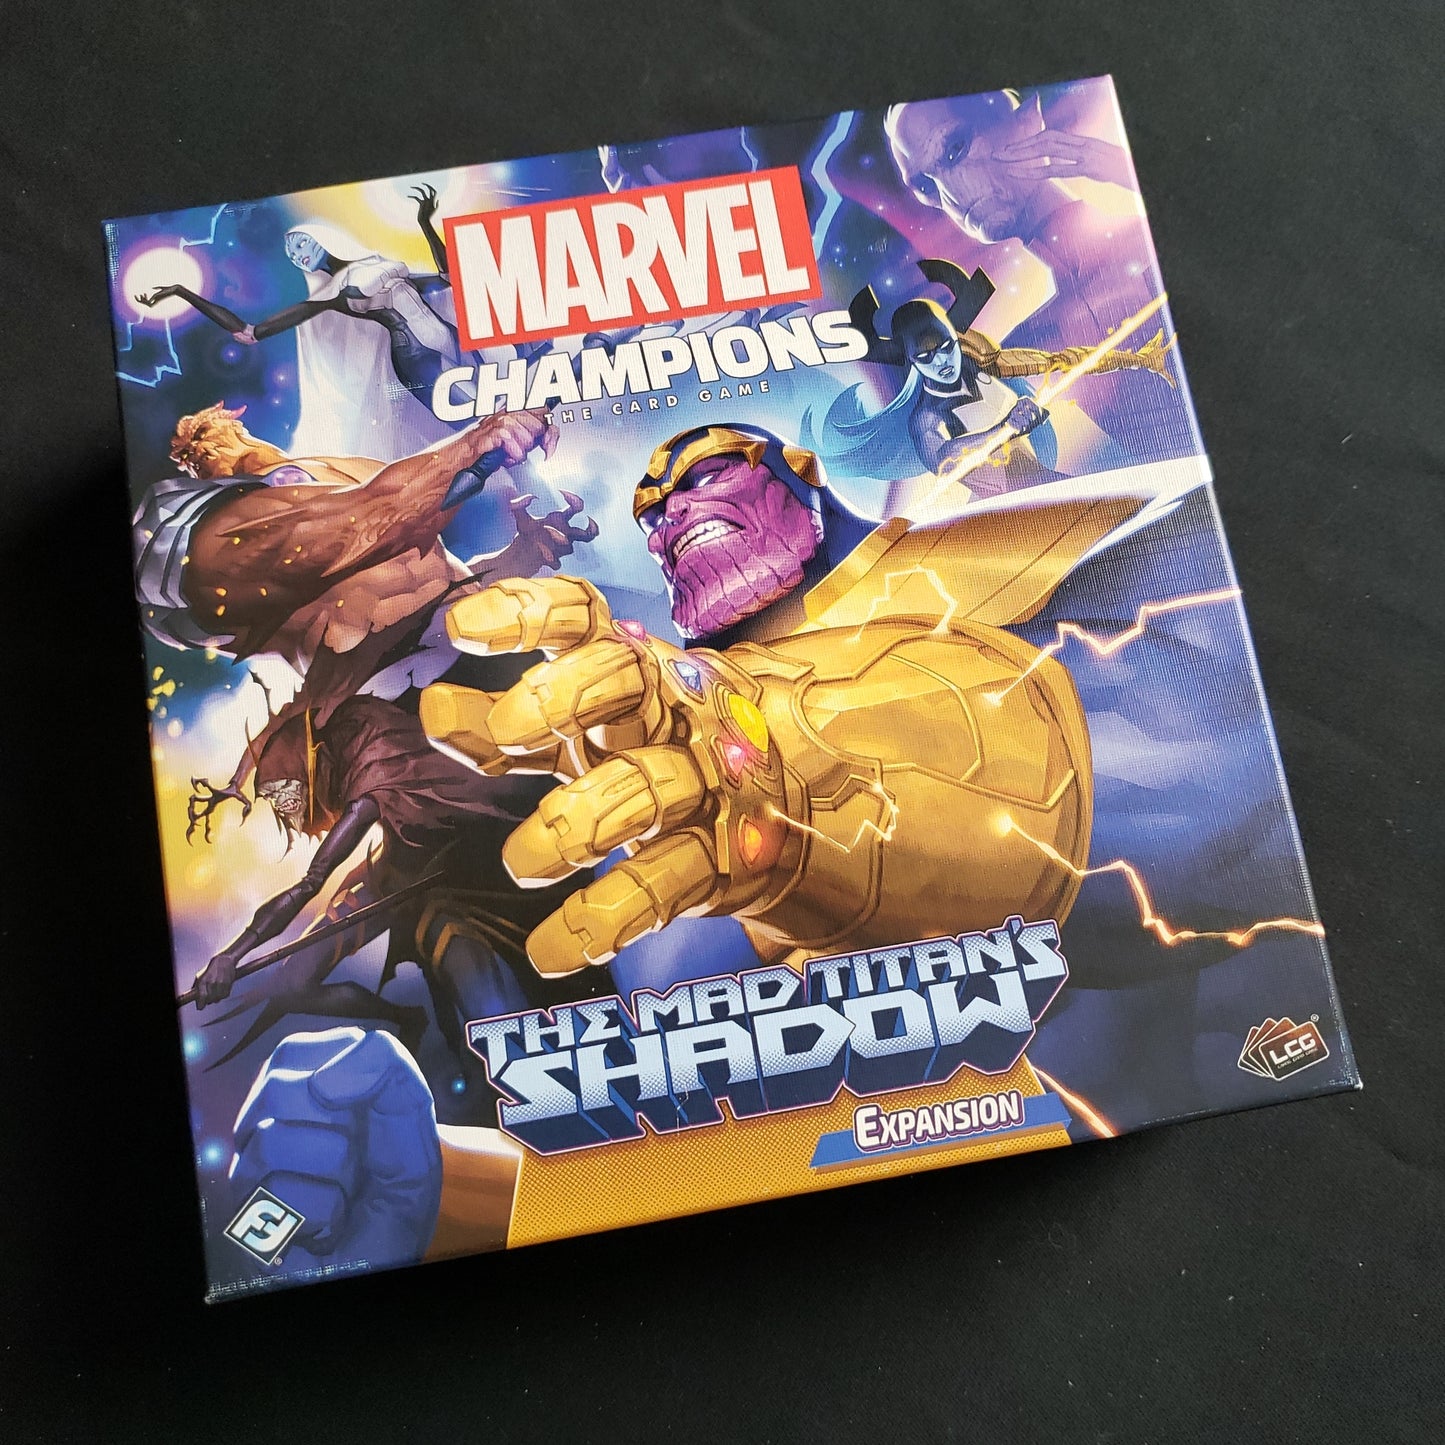 Image shows the front cover of the box of the Mad Titan's Shadow expansion for the Marvel Champions card game